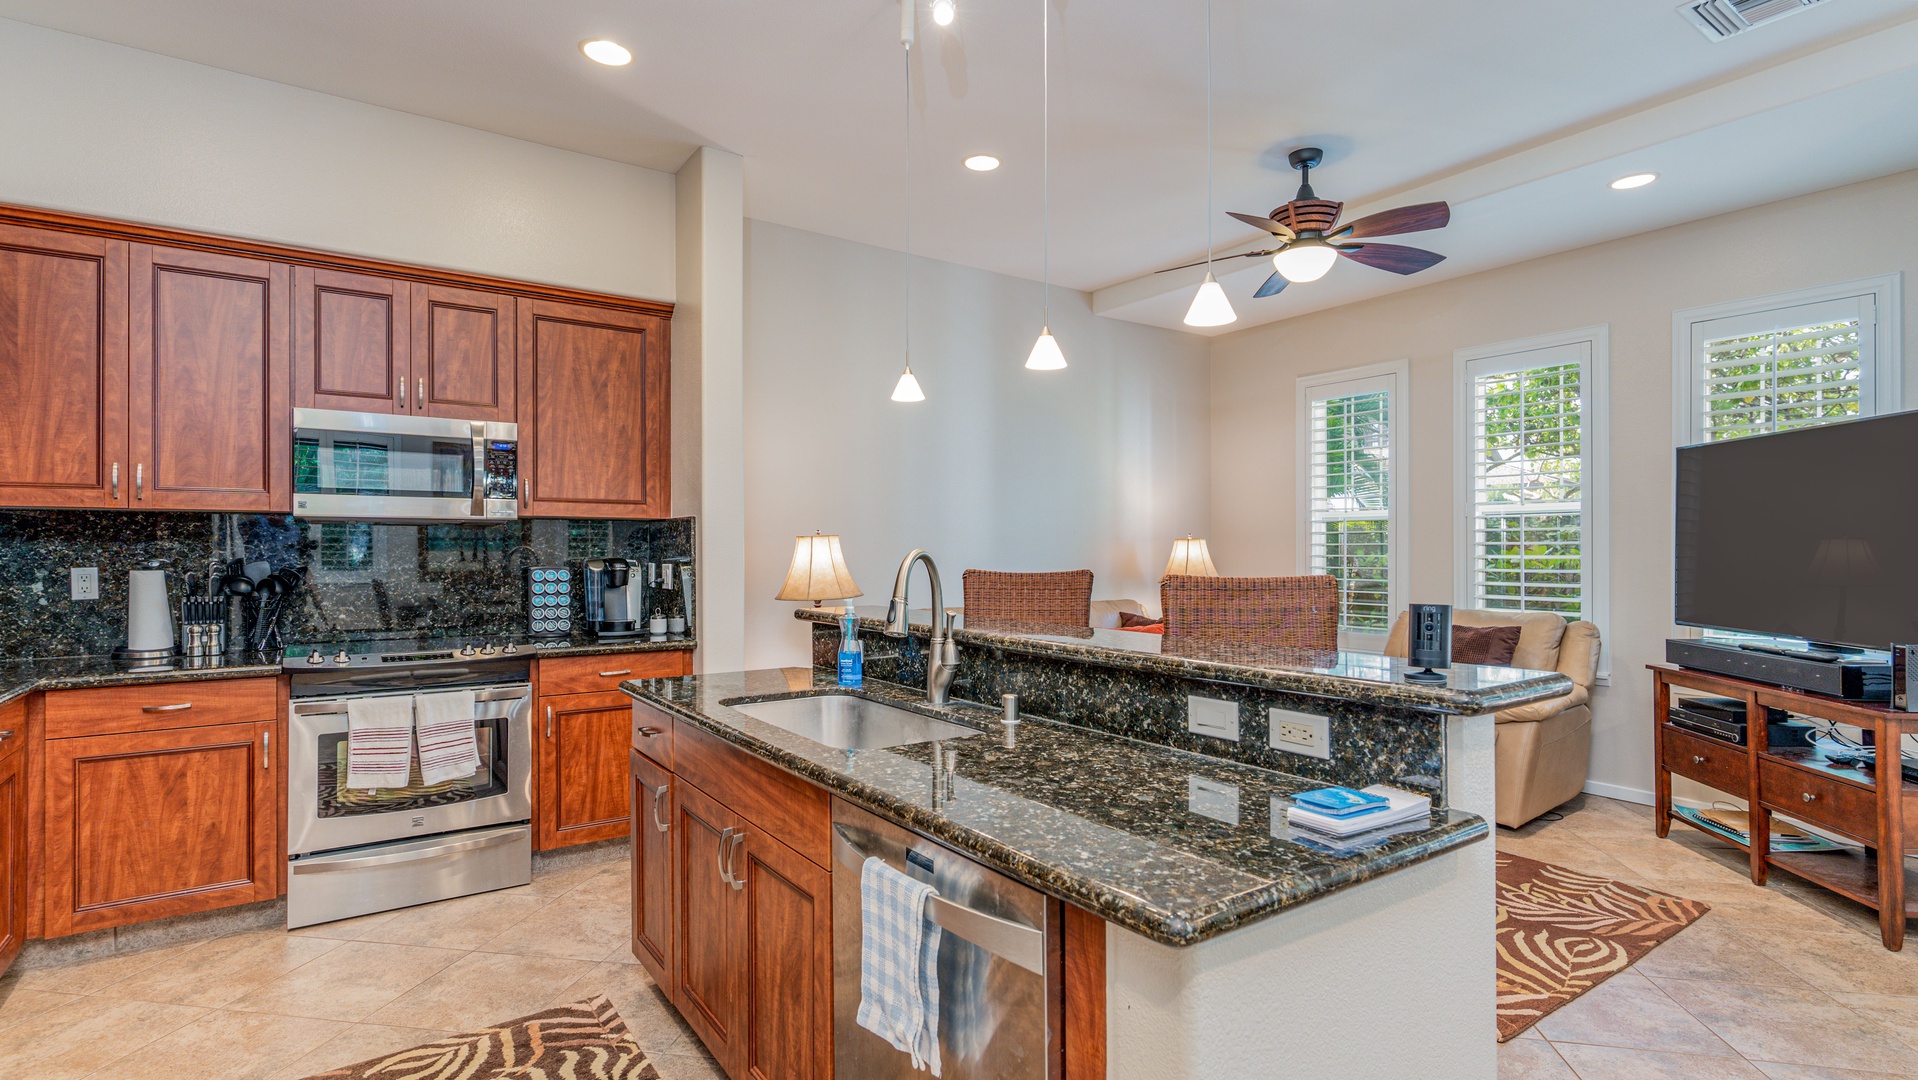 Kapolei Vacation Rentals, Coconut Plantation 1234-2 - The kitchen is equipped with stainless steel appliances for your culinary adventures.